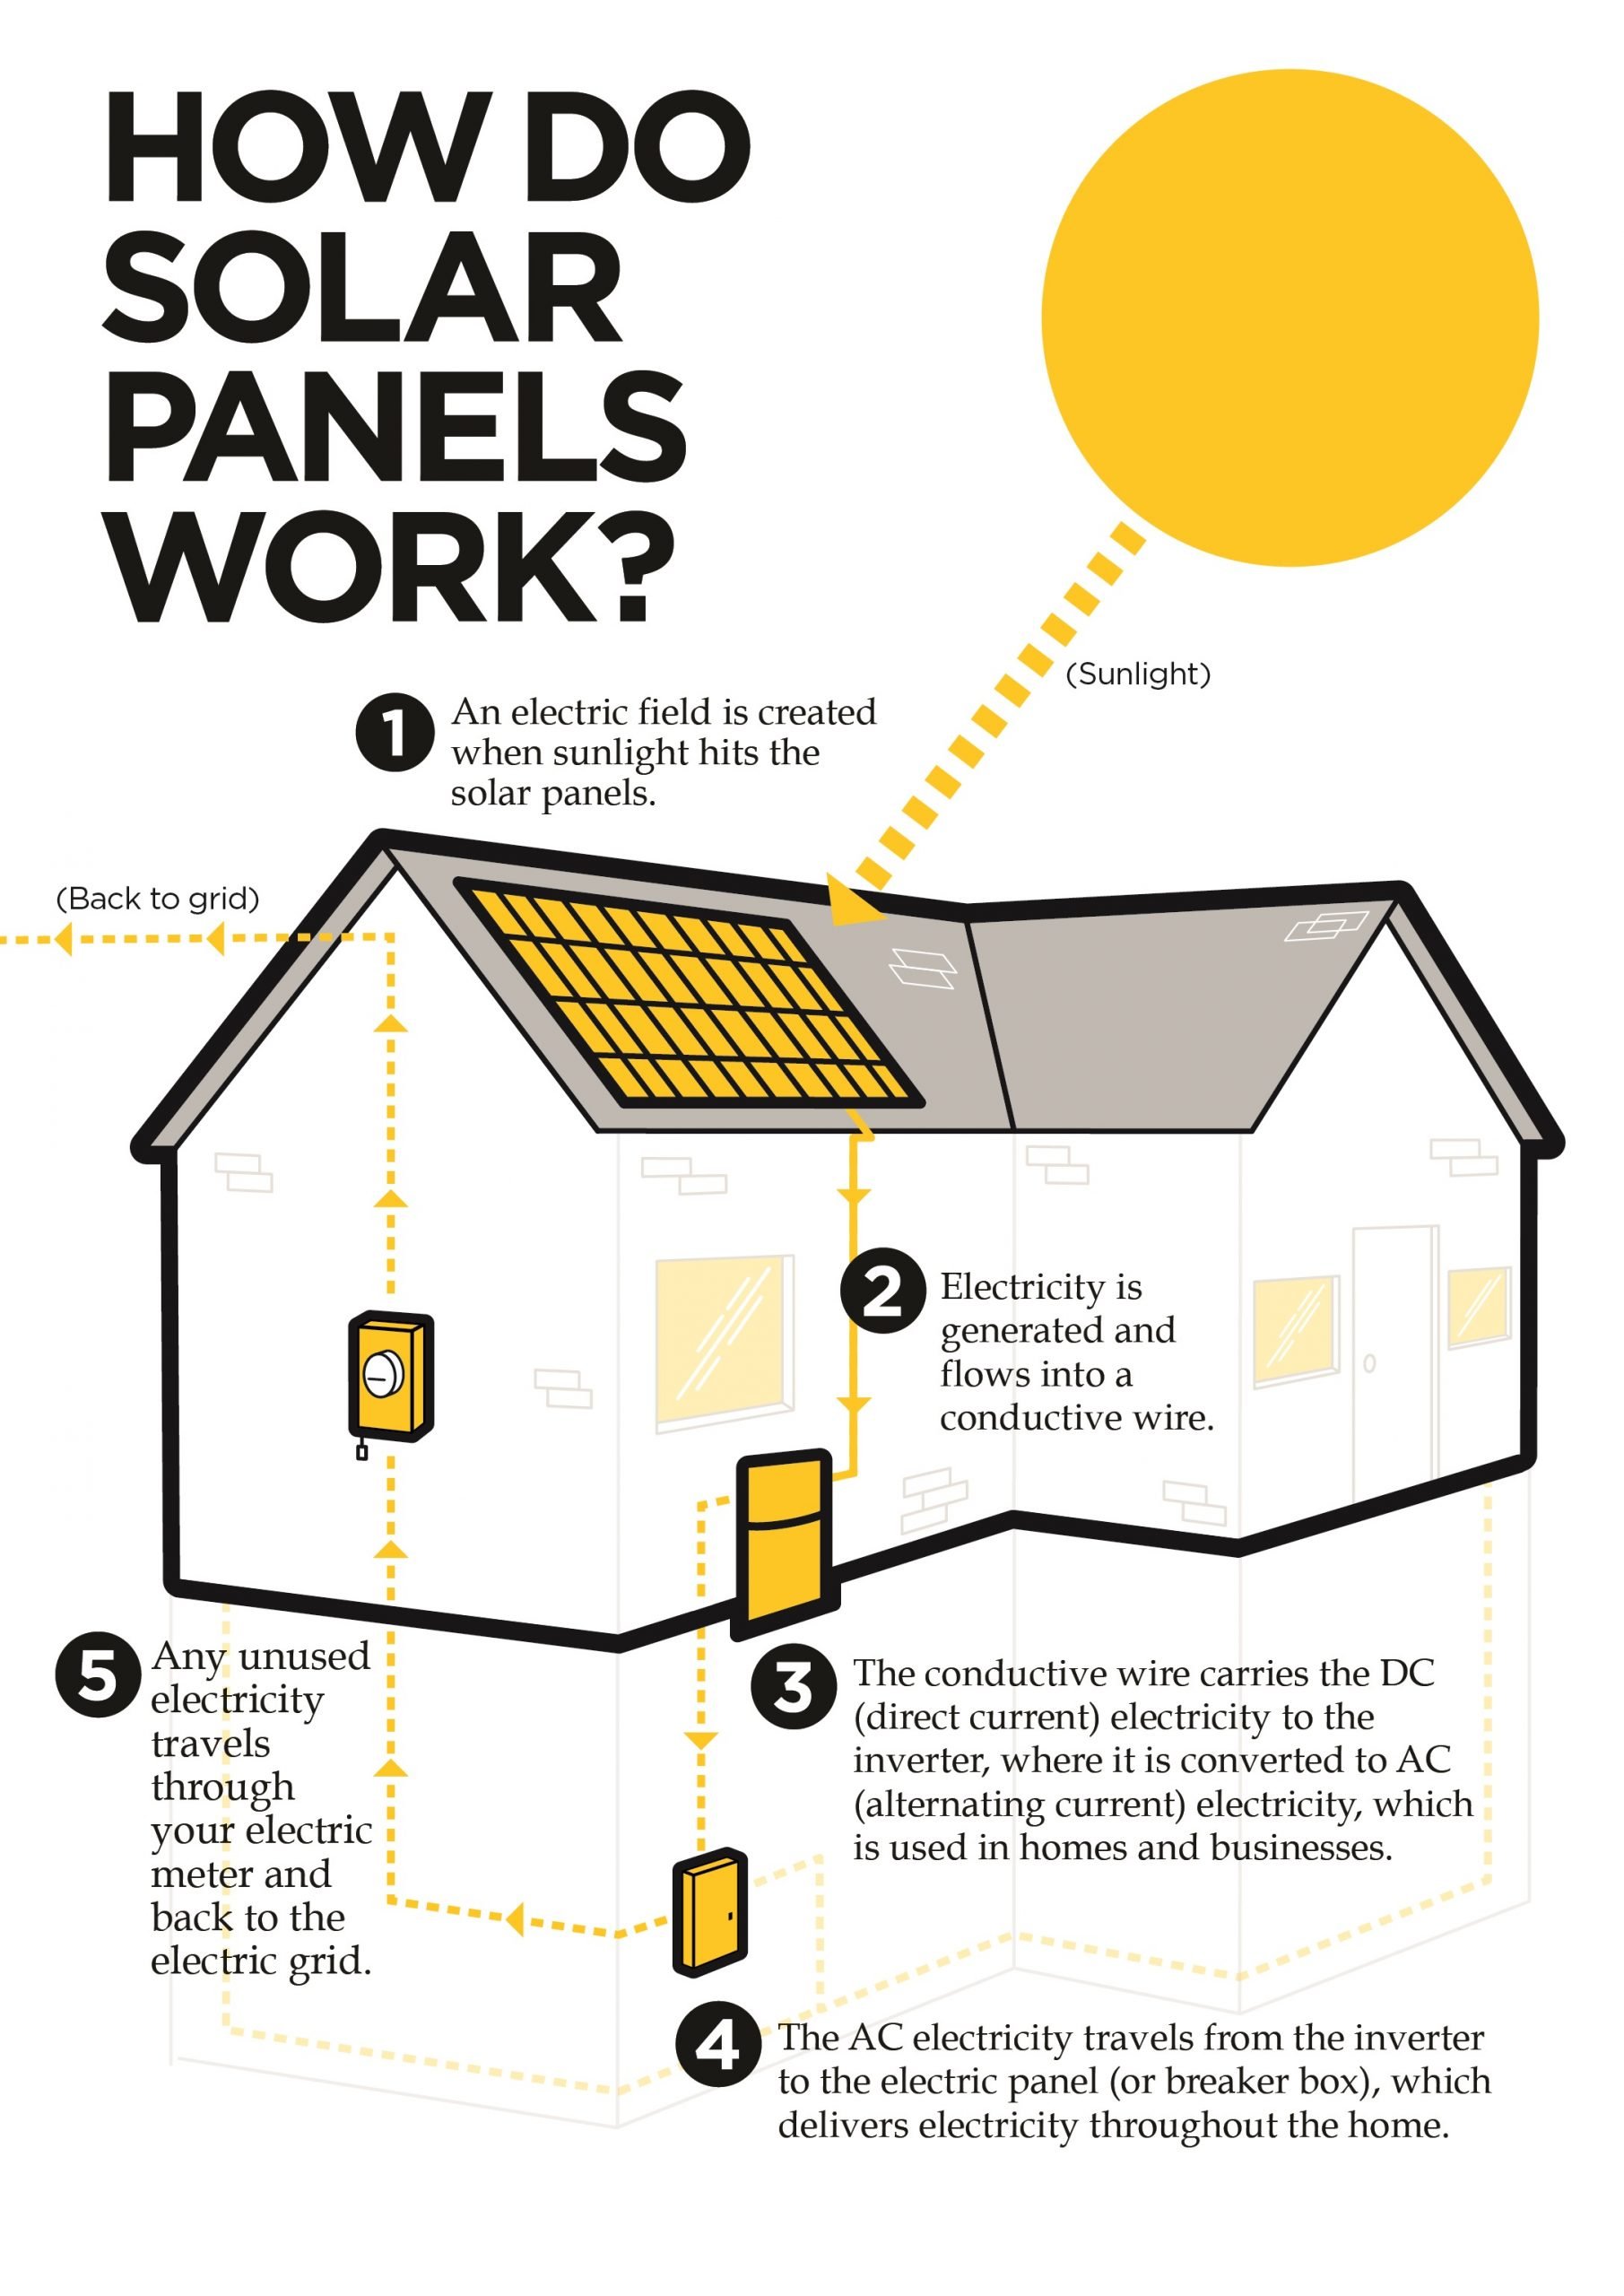 A glimpse into how solar panels work